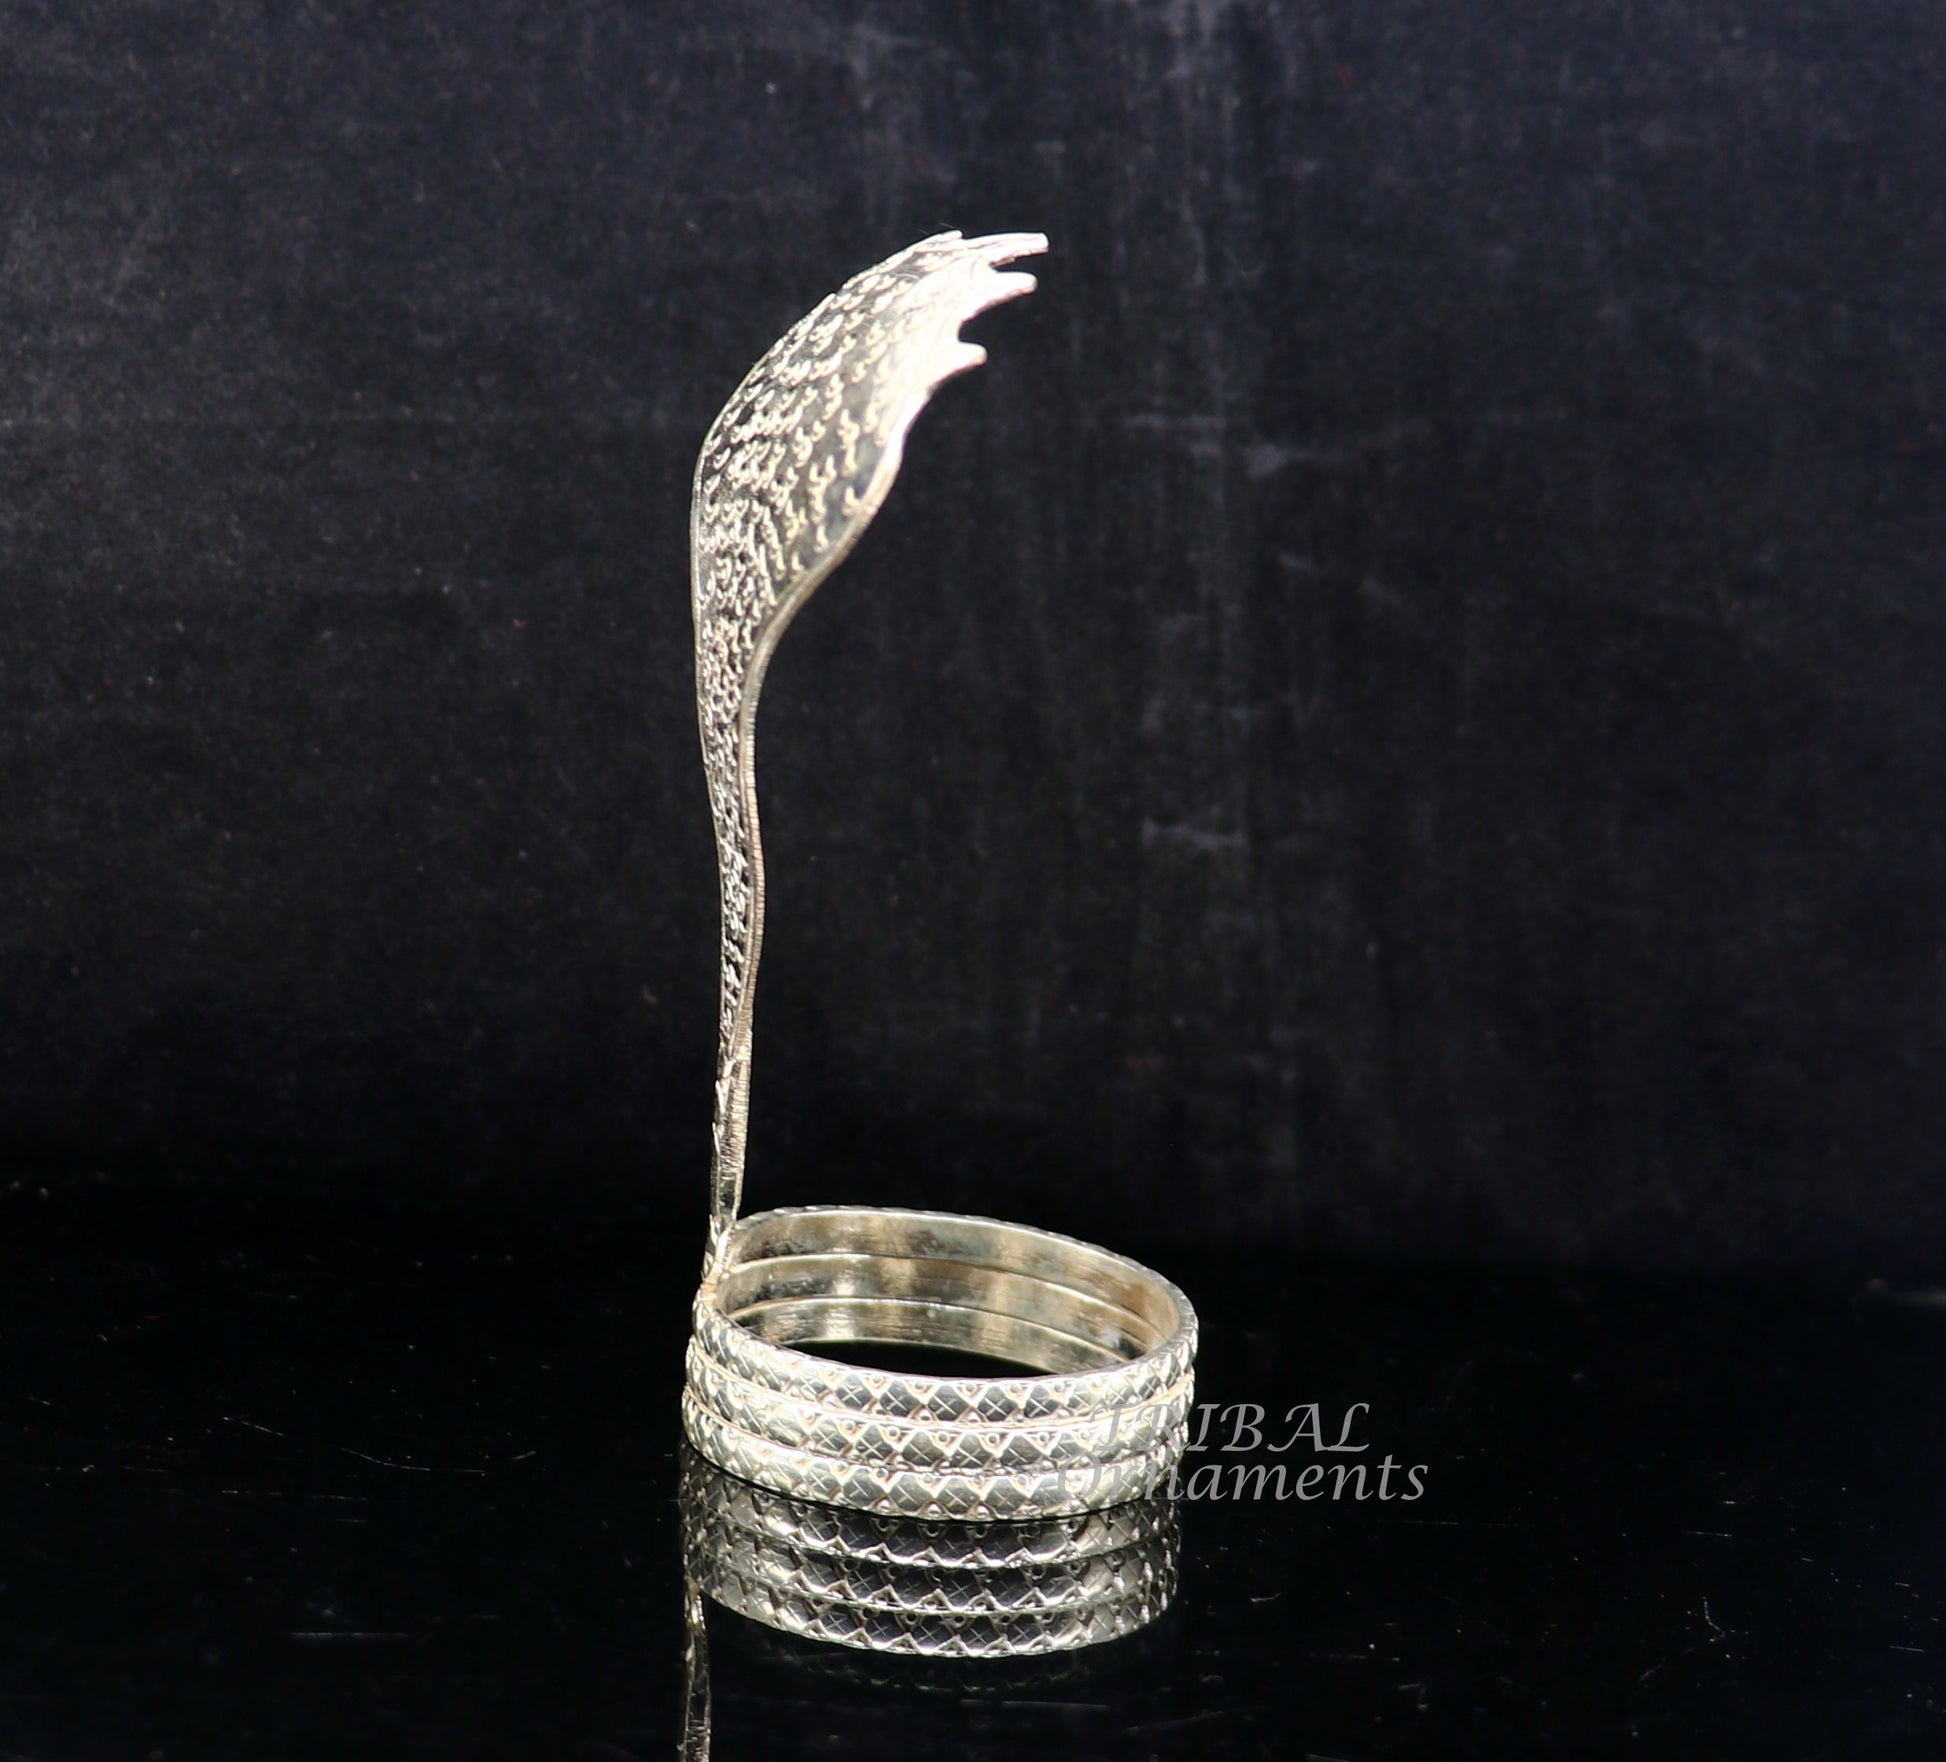 925 Solid silver handmade Divine Sheshnag vintage style mini snake or shiva snake for puja or worshipping, solid Diwali puja article su898 - TRIBAL ORNAMENTS